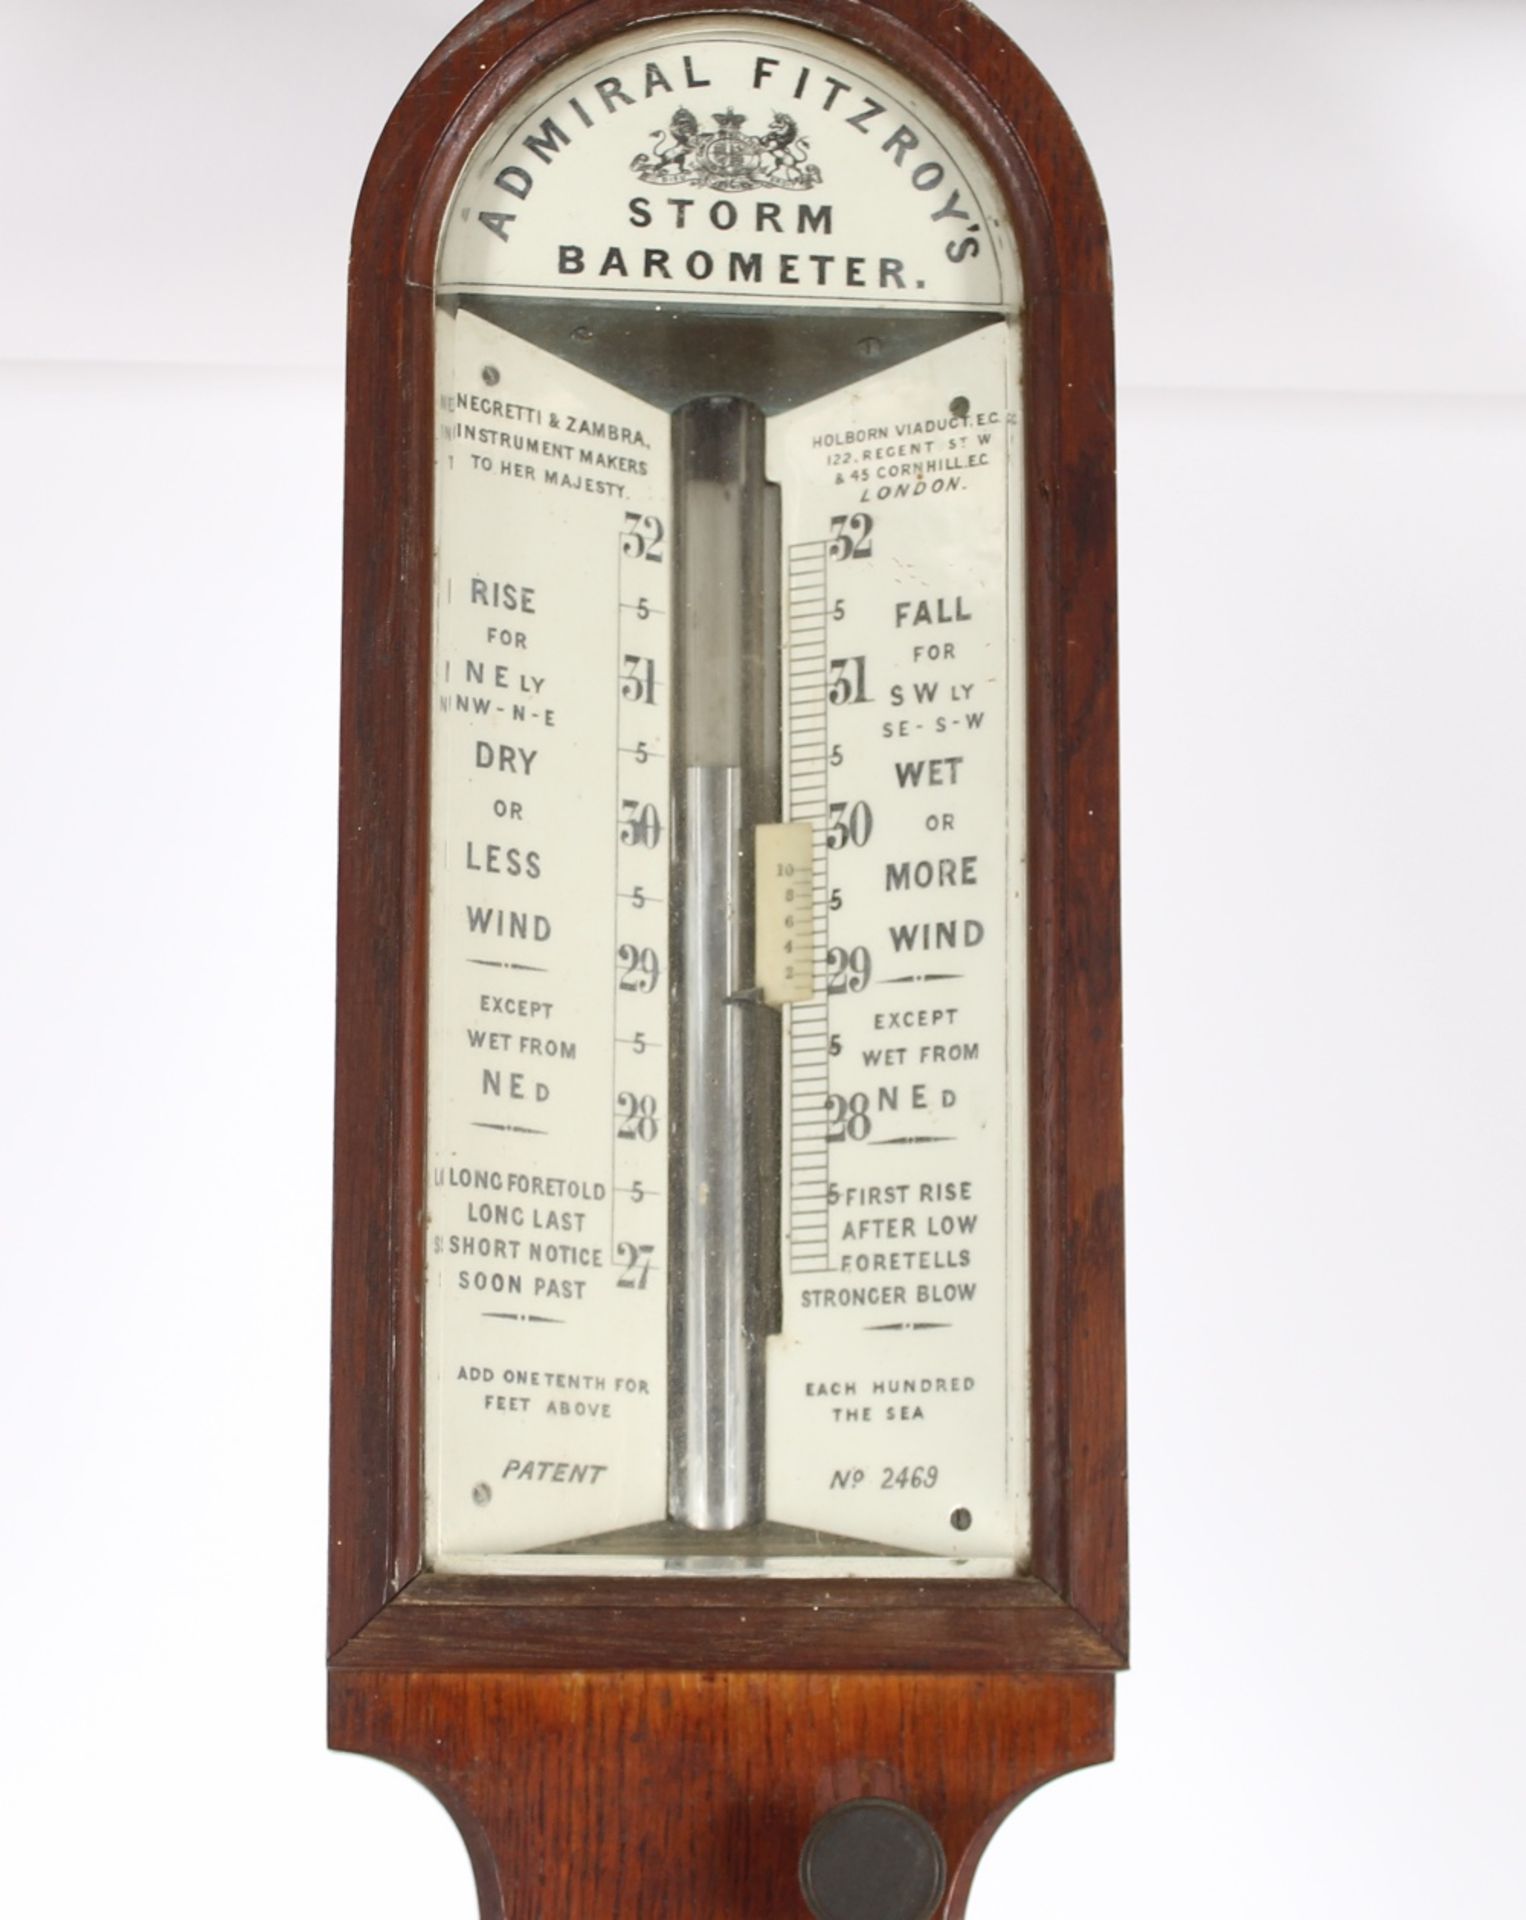 An Admiral Fitzroy's storm barometer by Negretti & Zambra, Instrument Makers to Her Majesty, - Image 2 of 4